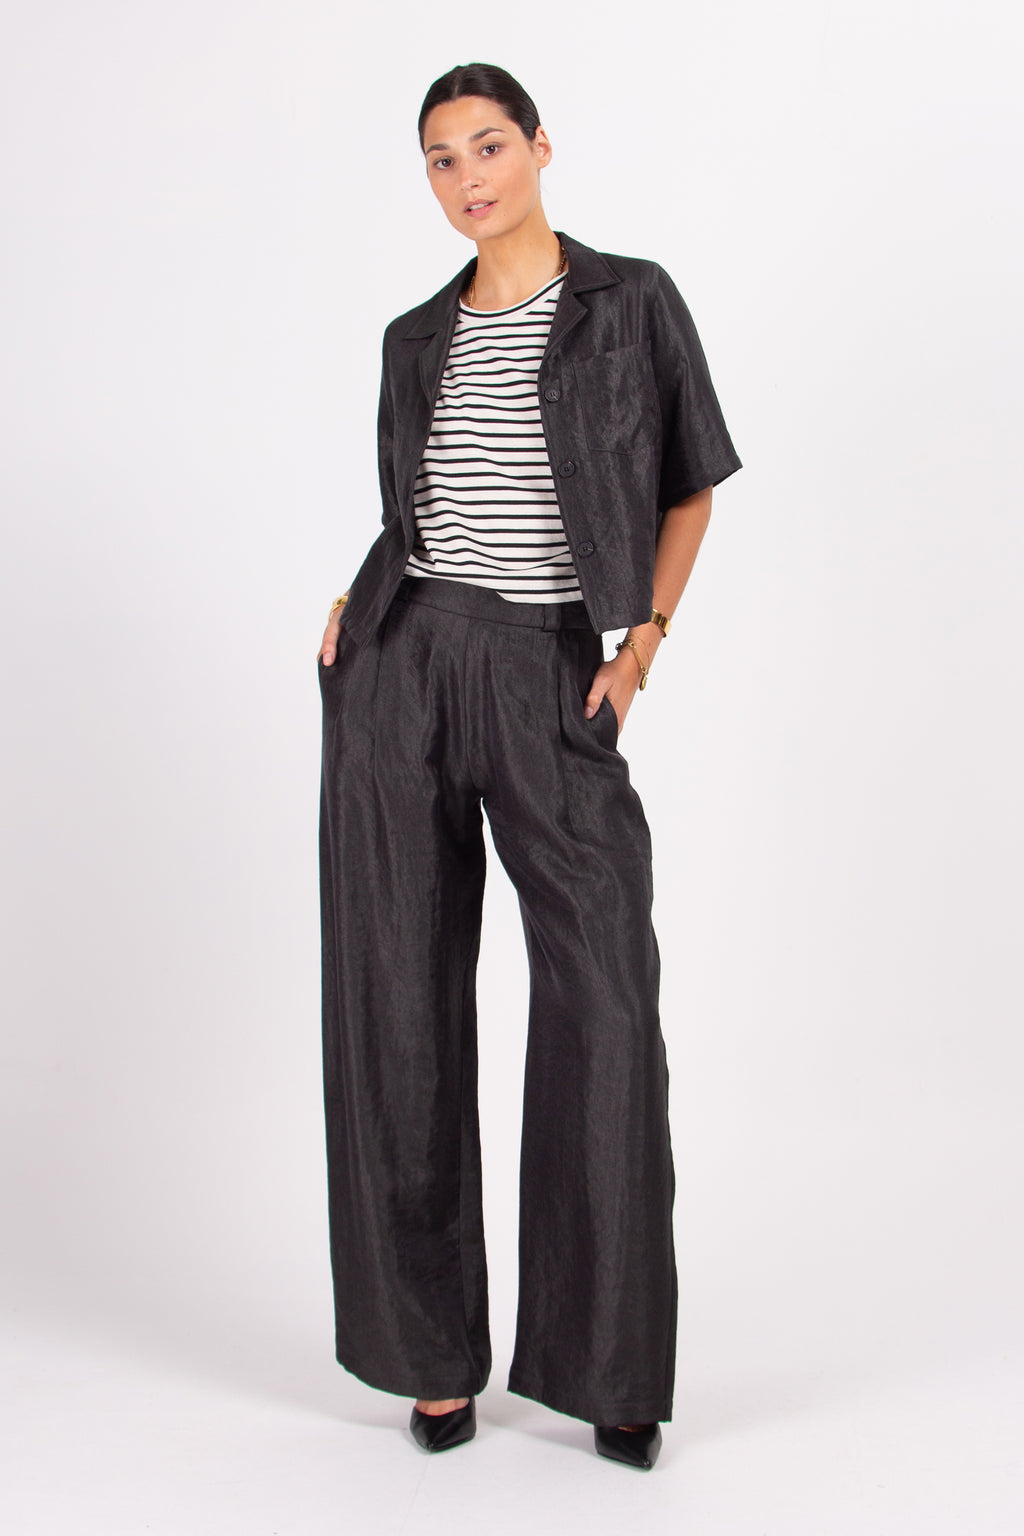 Castor trousers in shiny graphite